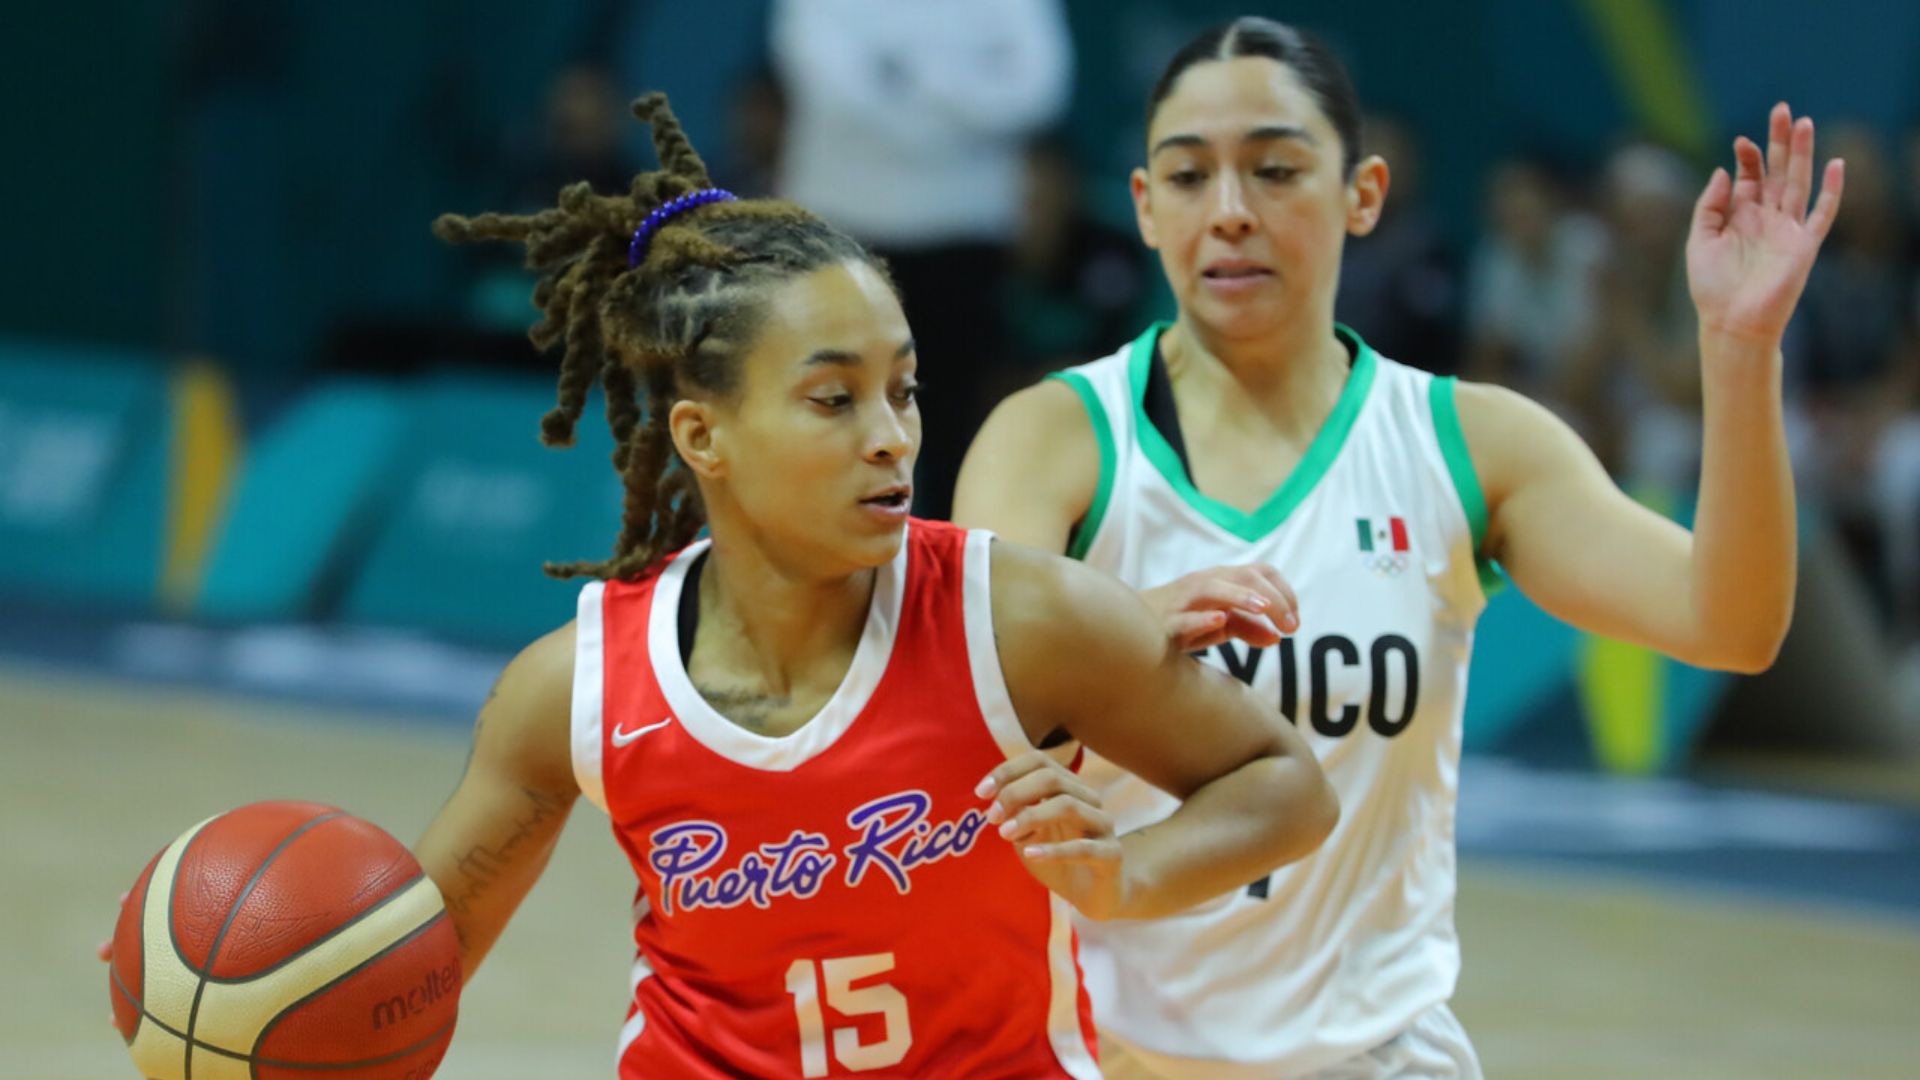 Female's Basketball: Puerto Rico defeats Mexico and secures 7th place